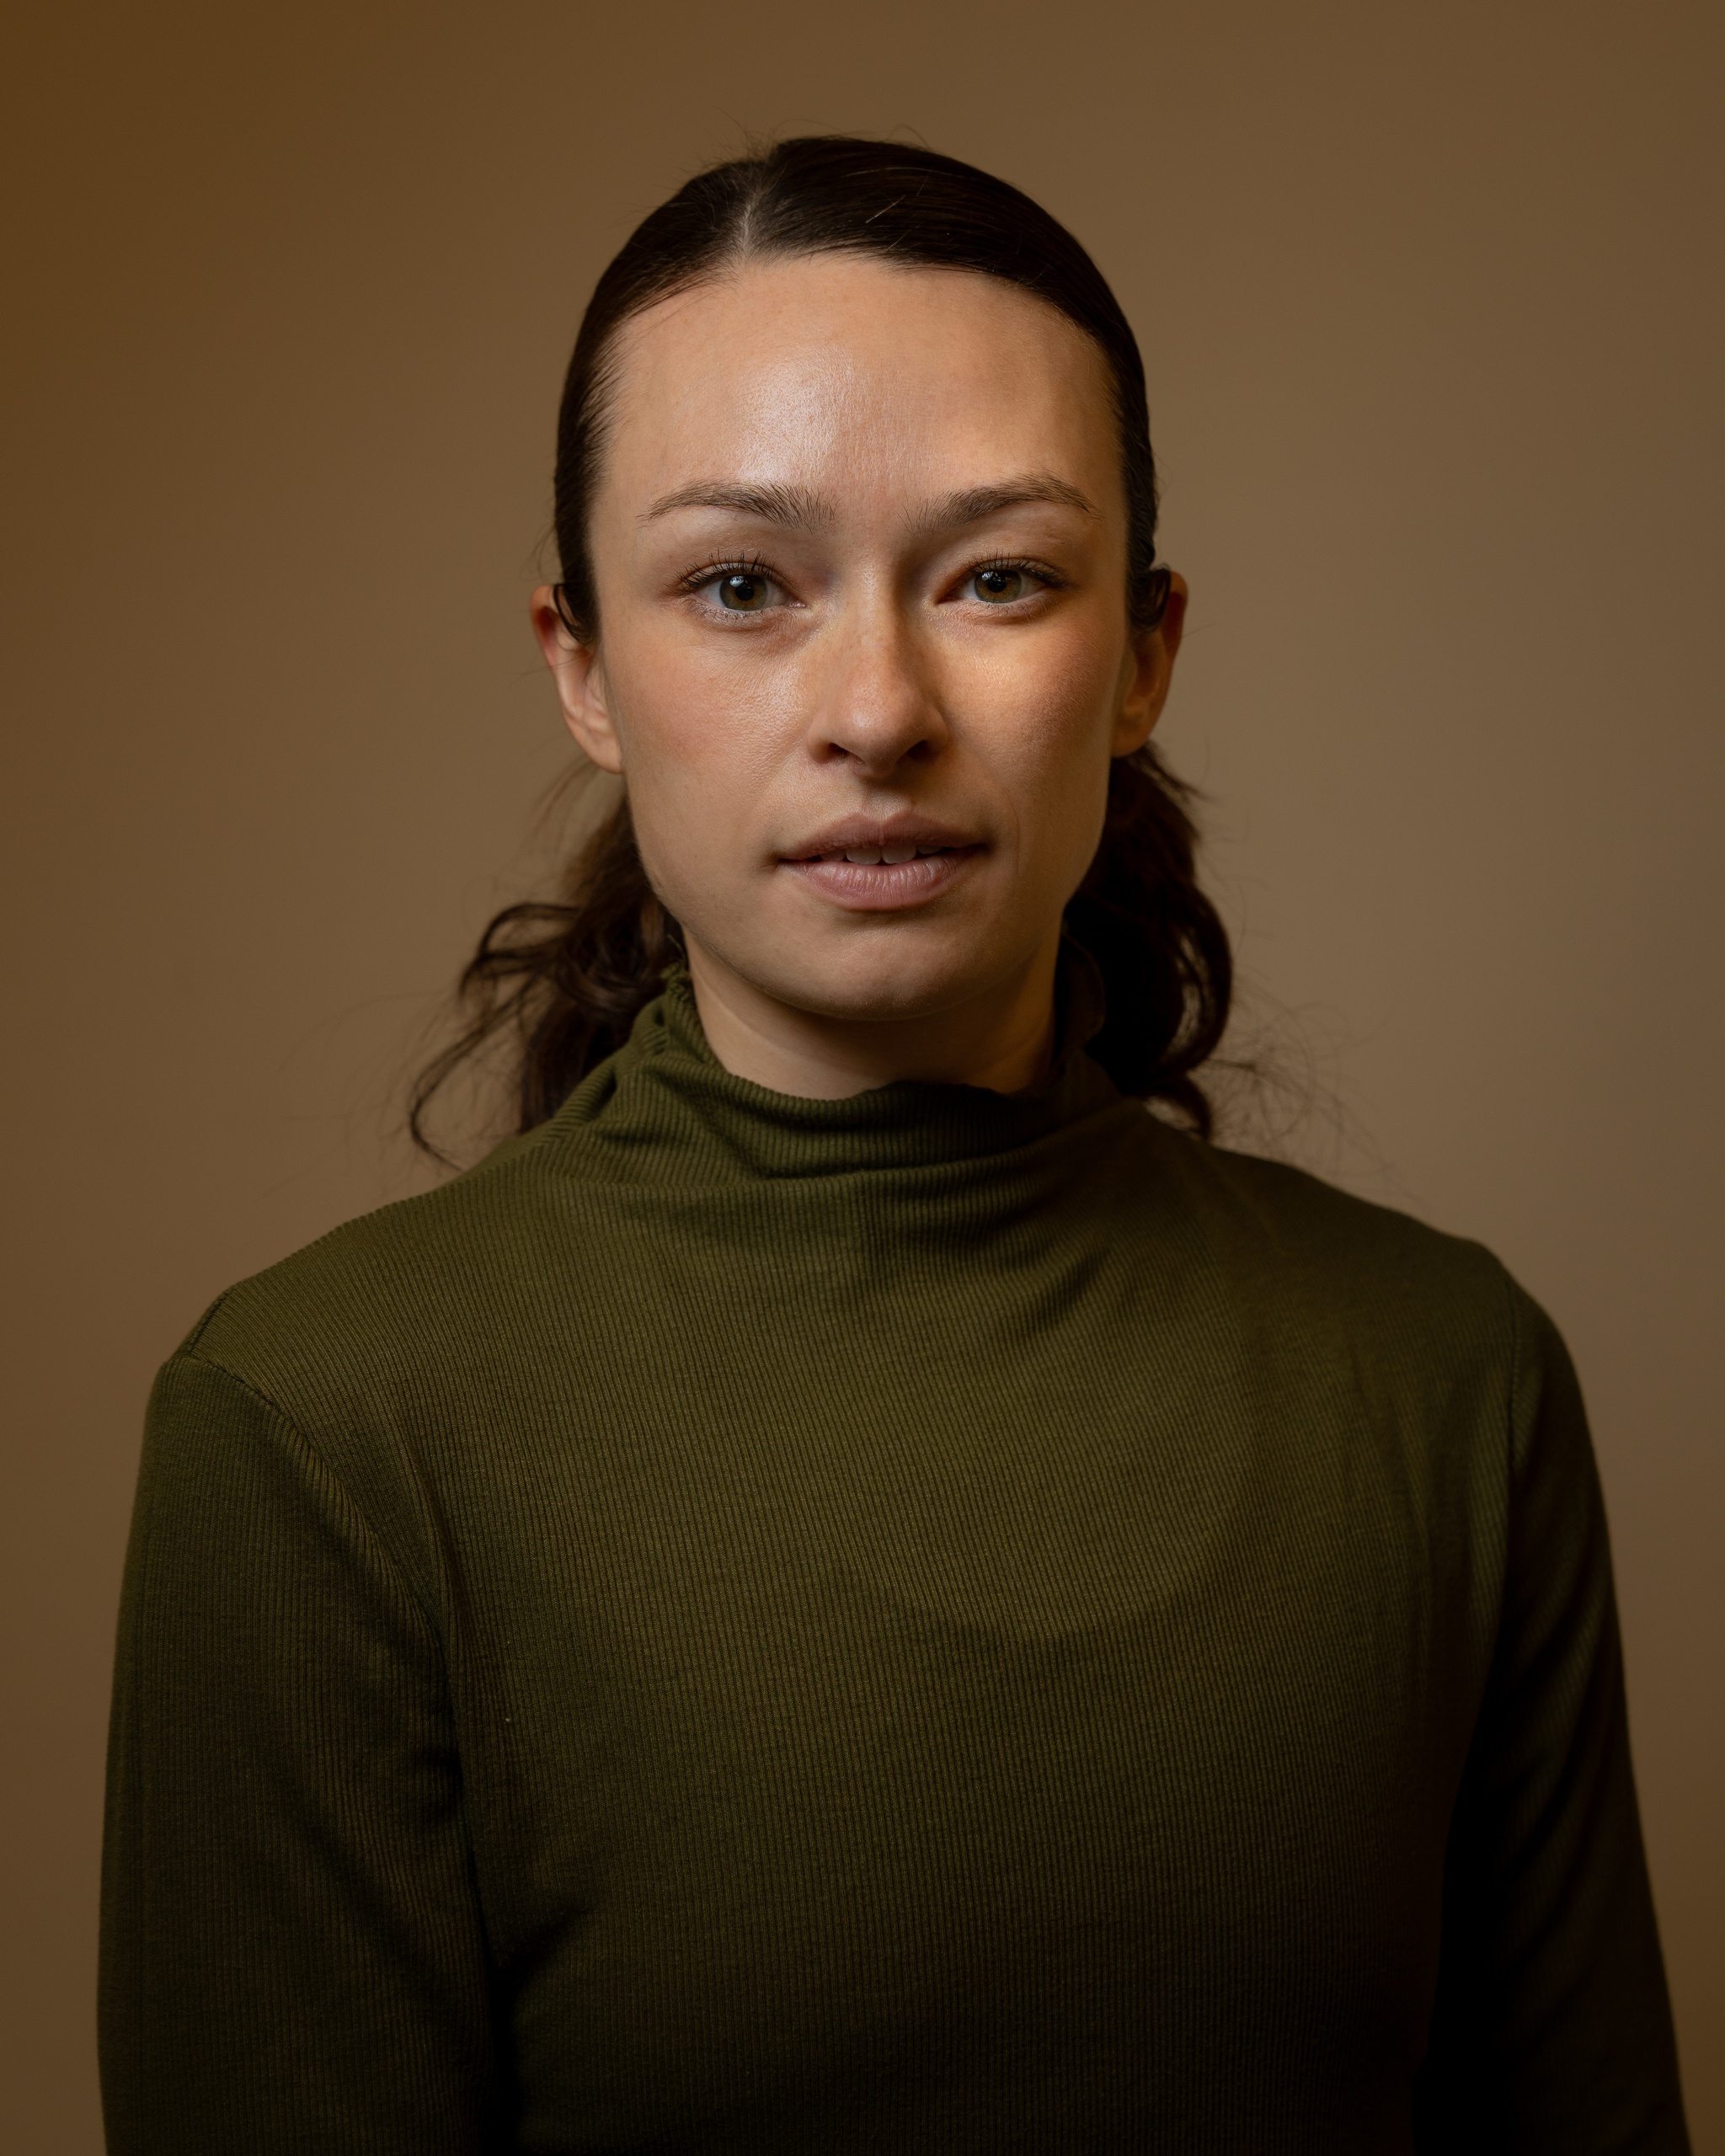 A portrait of Nicole Baker against a neutral brown background. Nicole wears a dark, khaki green longsleeved shirt with her brown hair tied back behind her head. She looks directly at us with one eyebrow raised. 